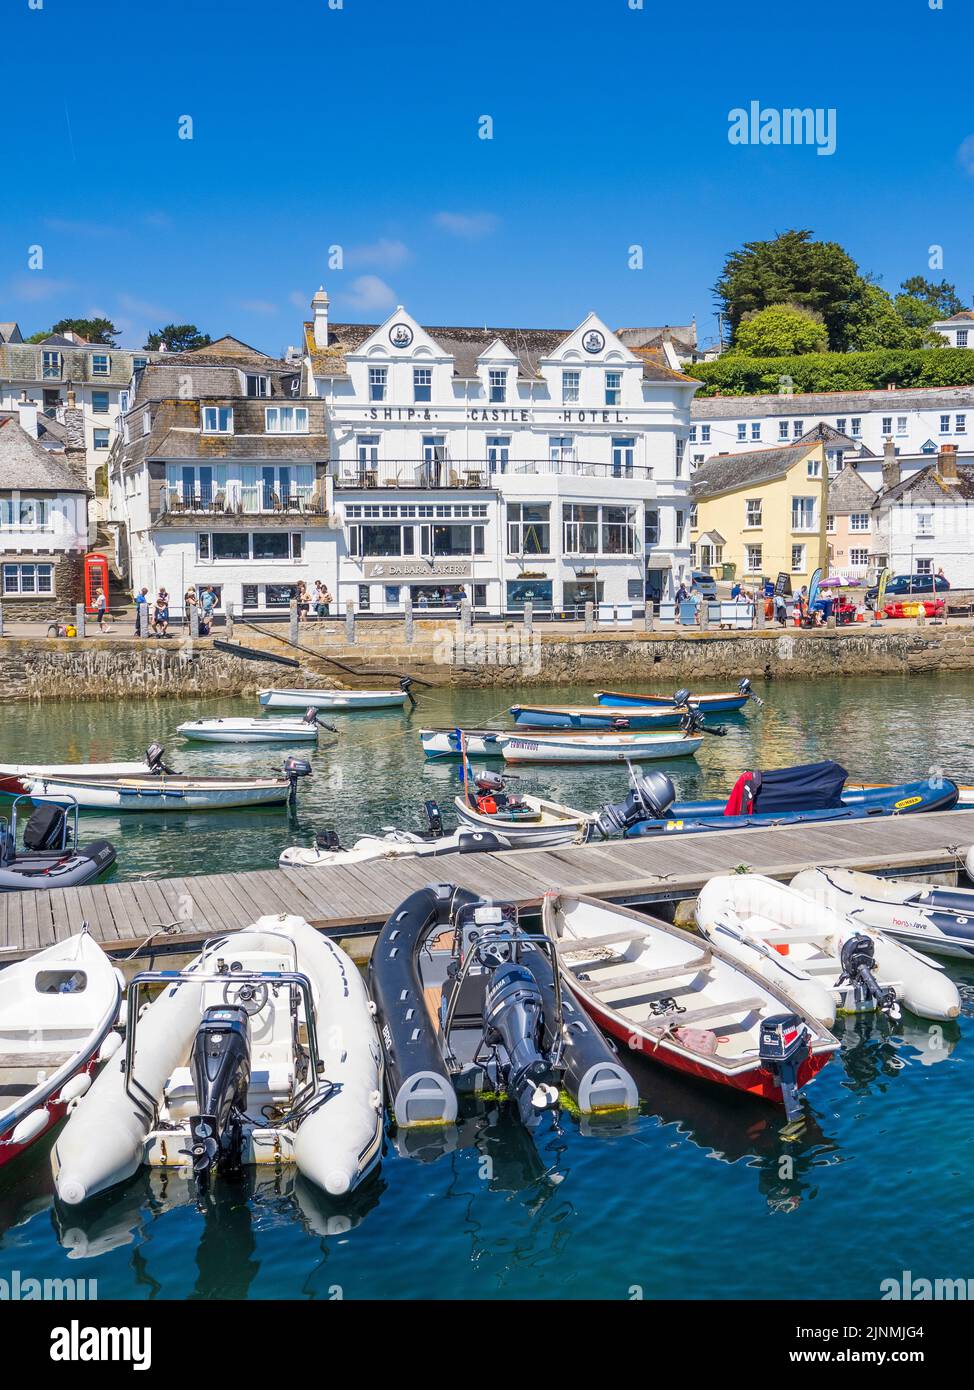 Jetty St Mawes Harbour, St Mawes, Falmouth, Cornouailles, Angleterre, ROYAUME-UNI, GB. Banque D'Images